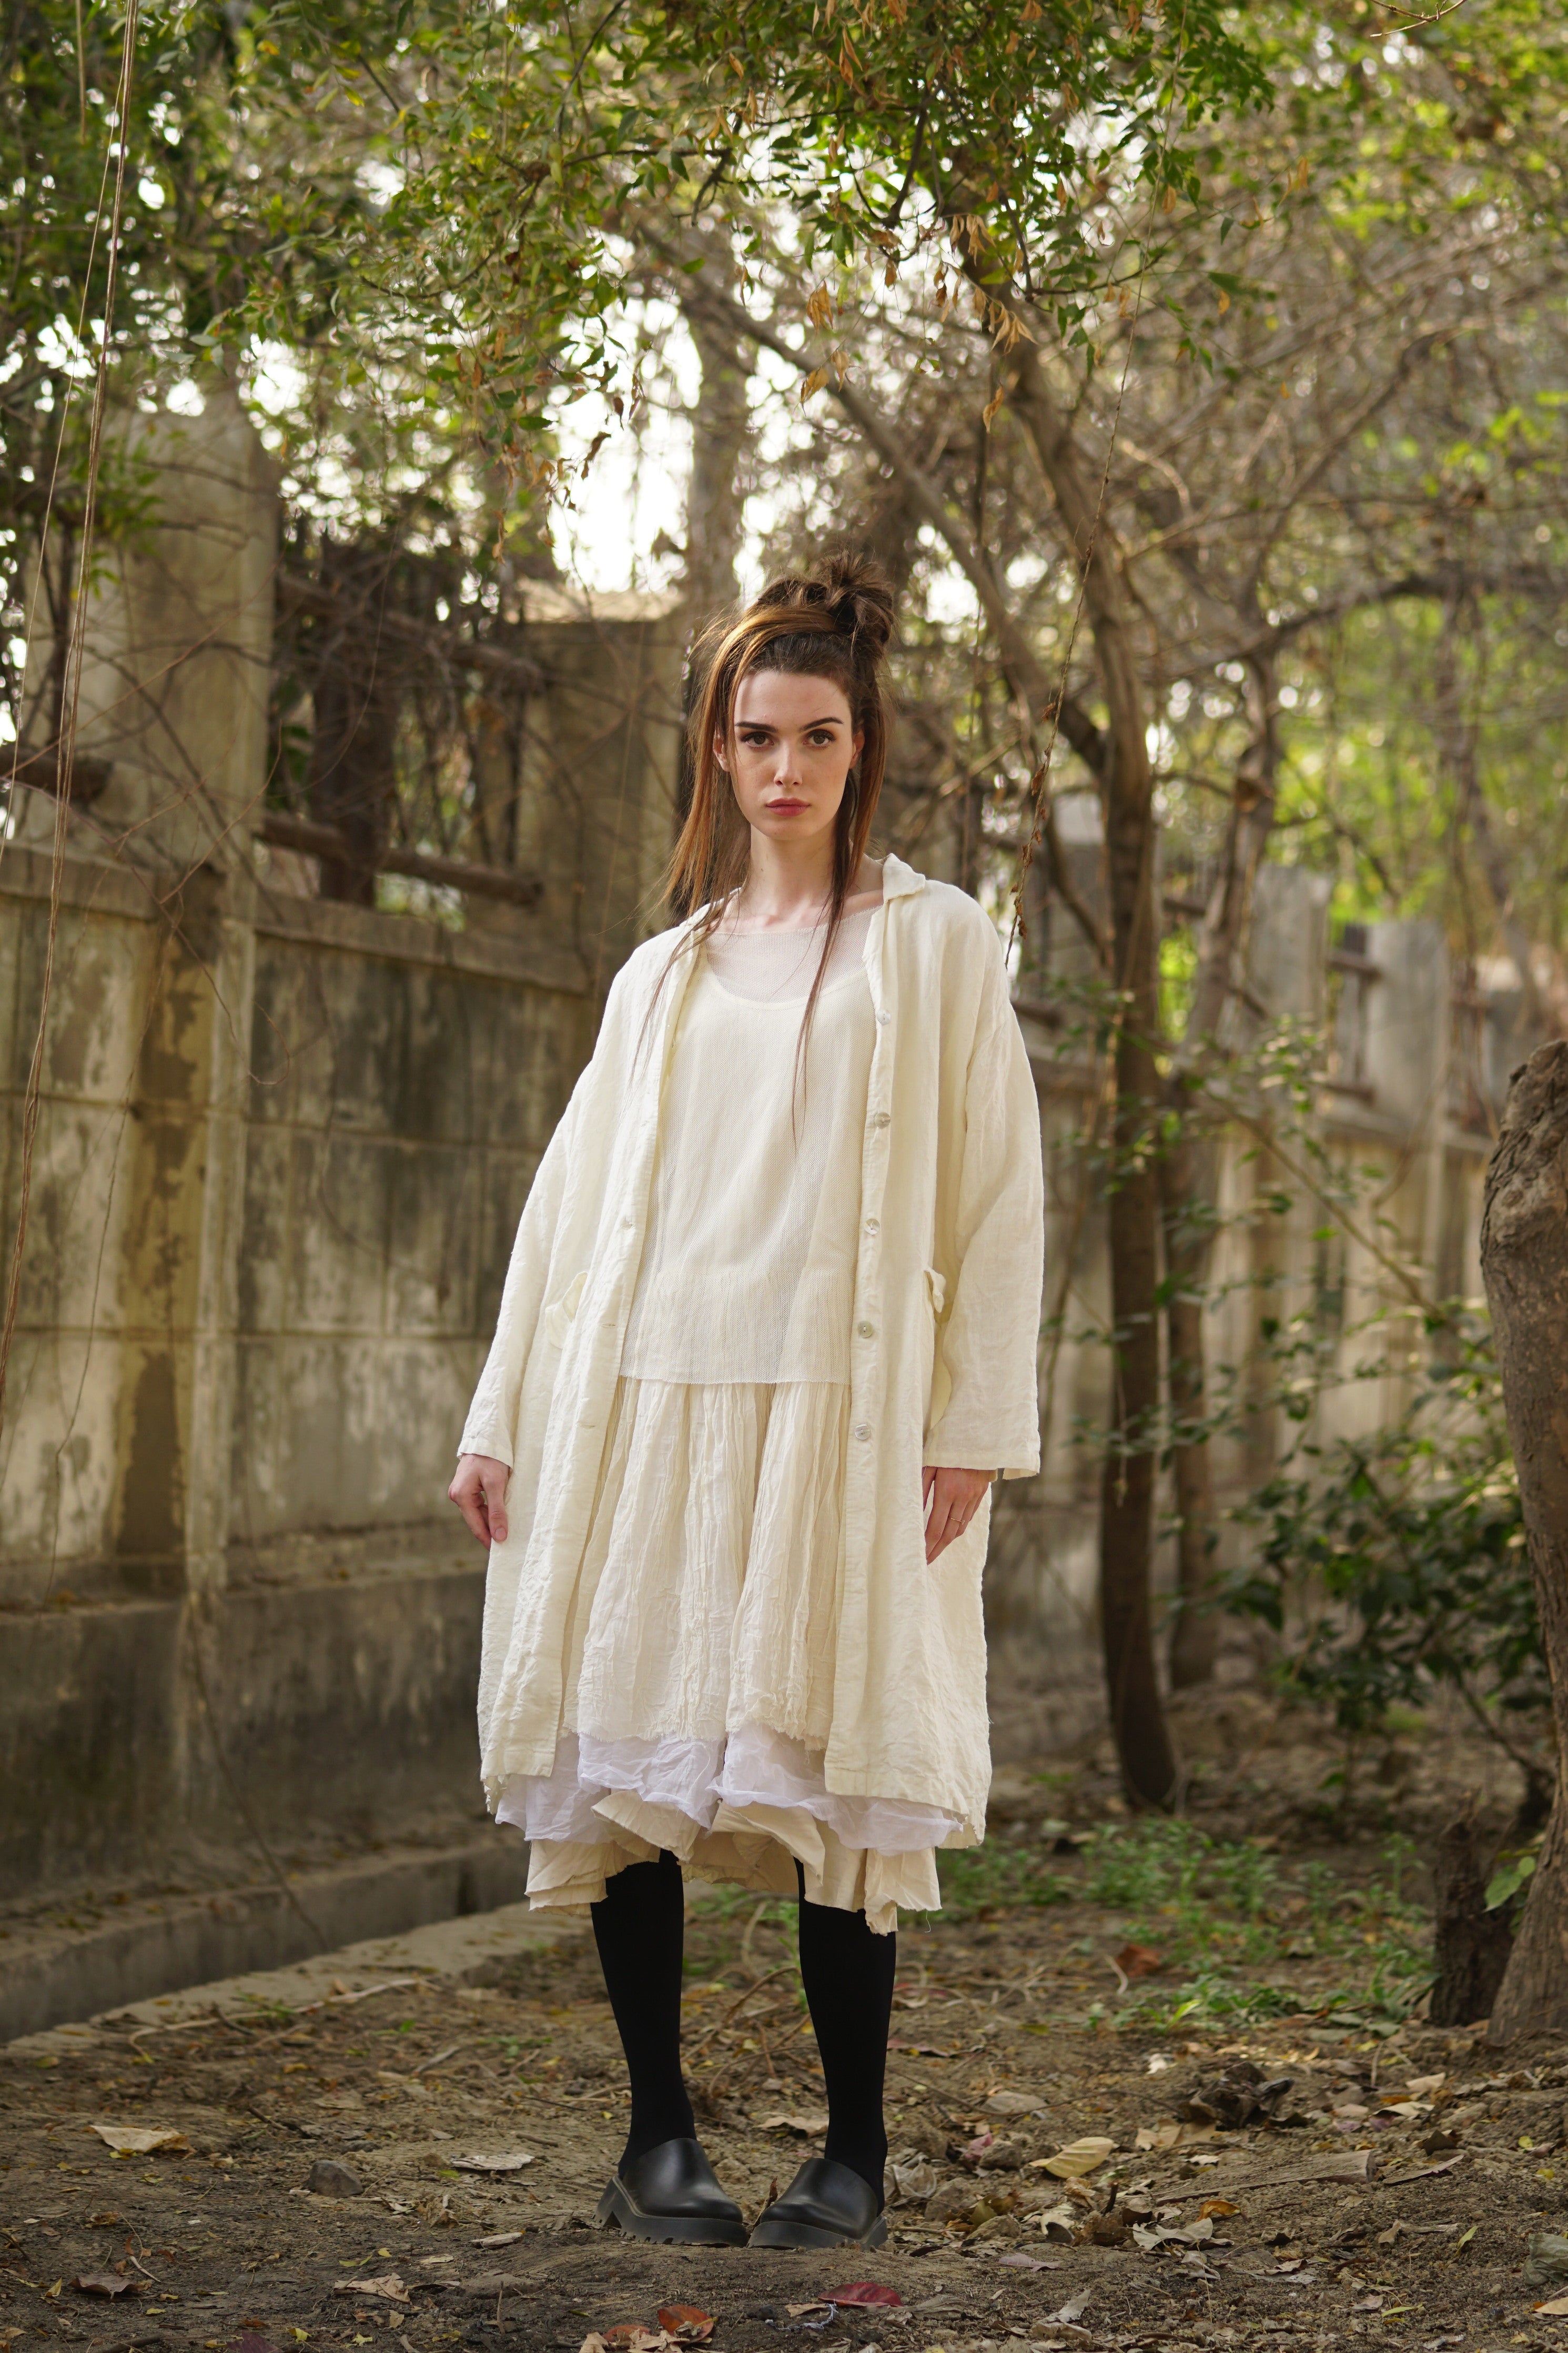 A MegbyDesign model is wearing a cream linen coat with agoya shell buttons